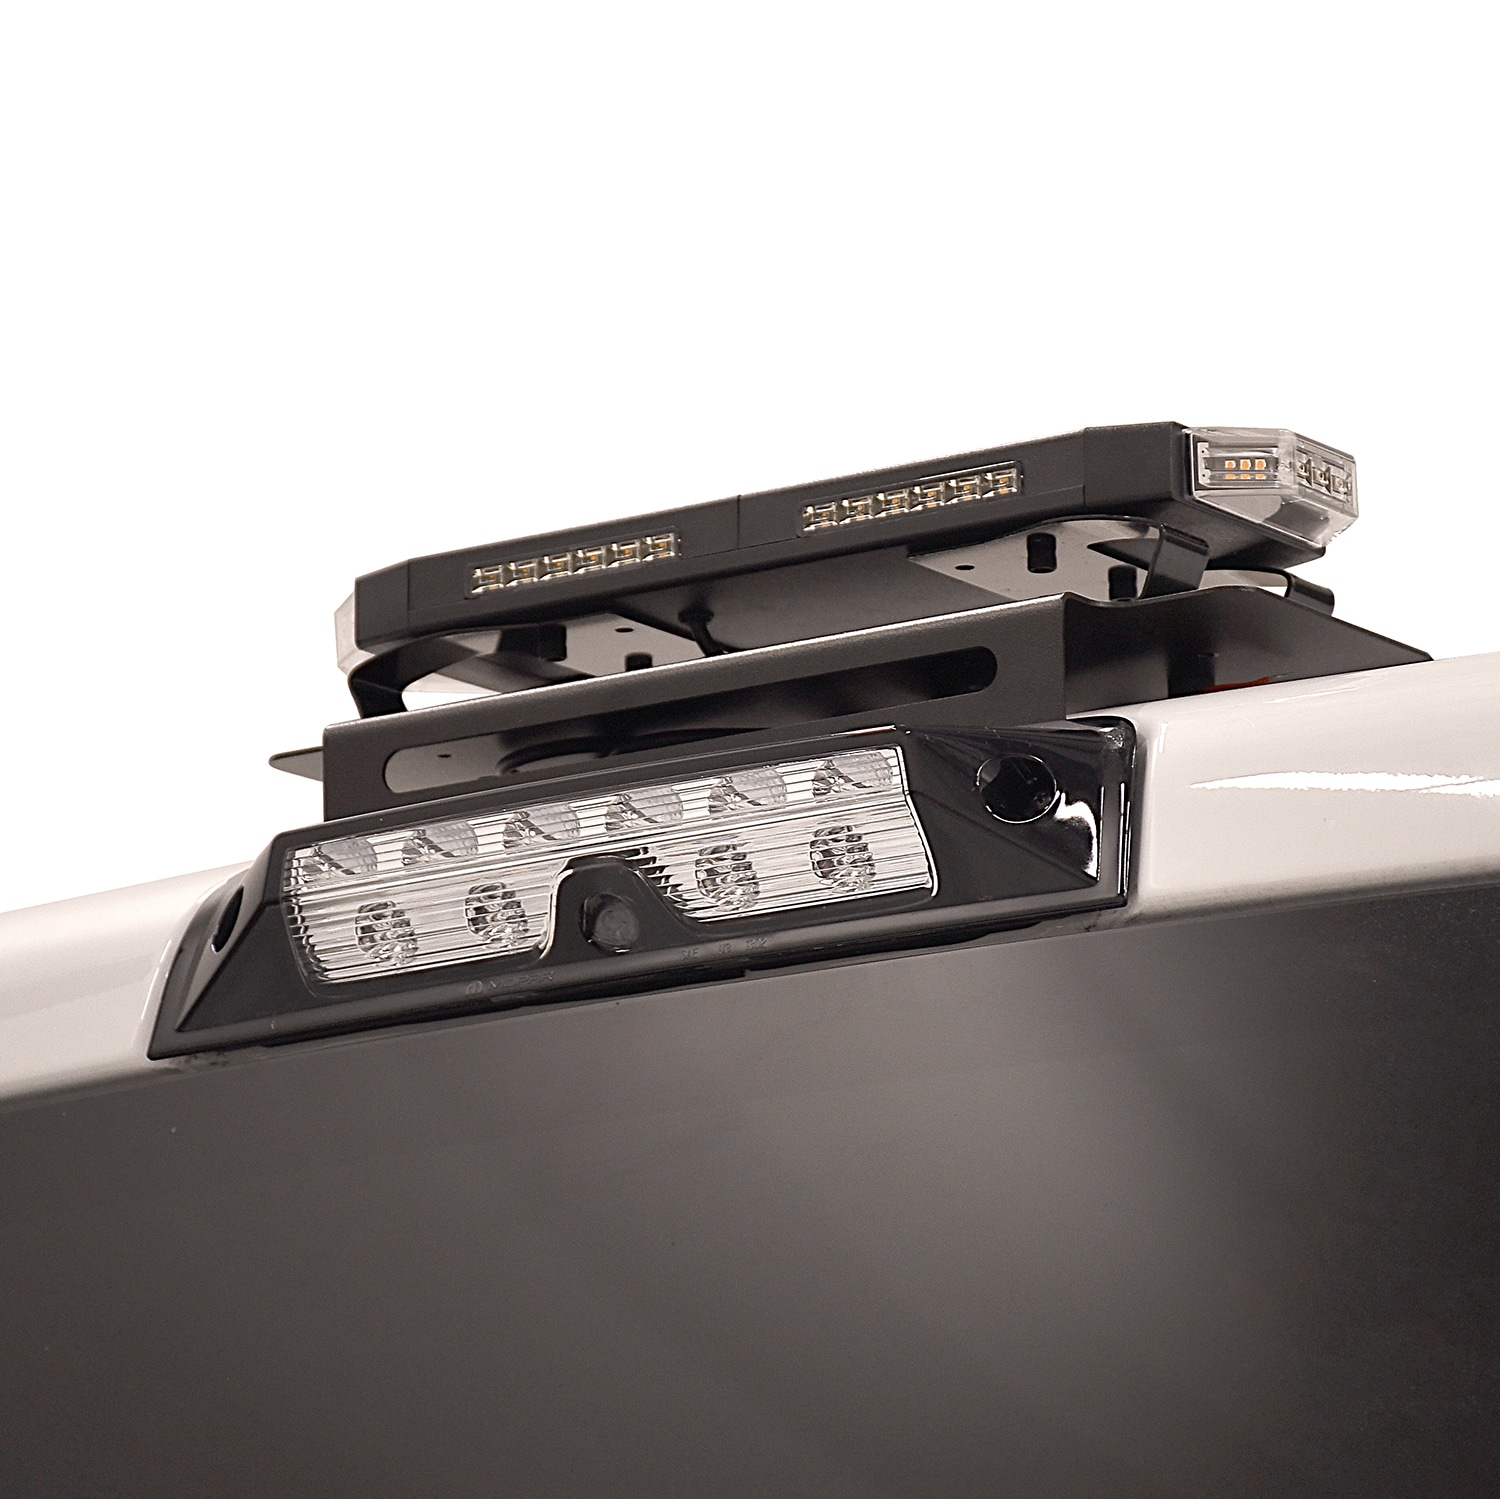 47 Amber 330W COB LED Emergency Warning Rooftop Car Truck Strobe Light Bar  + On/Off Switch + Mounting Kit 